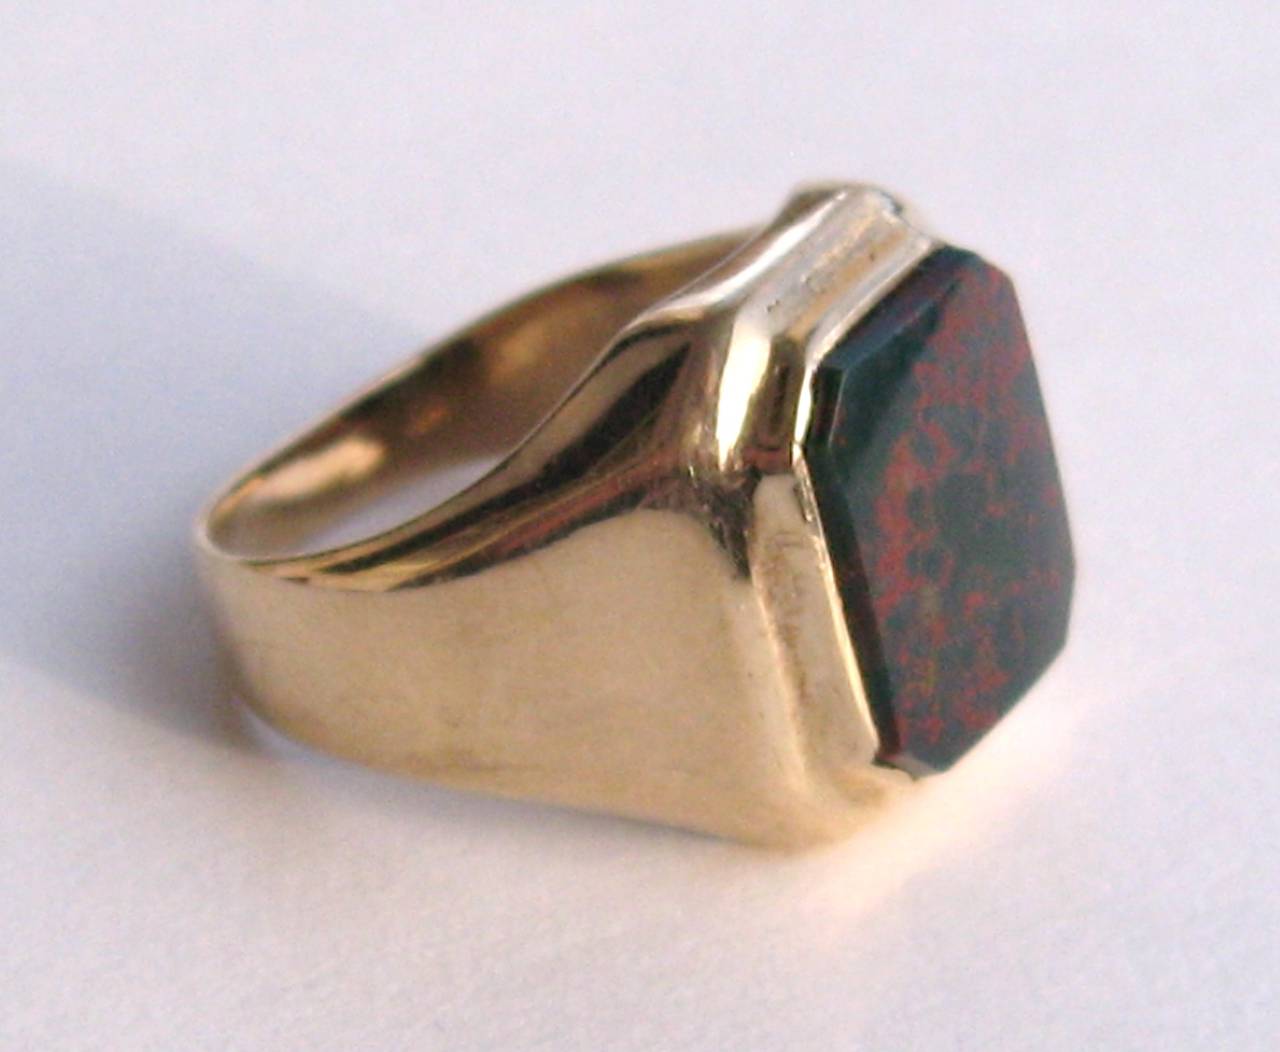 The mounting is classic and simple, set in 14K Yellow Gold 
wide shoulders of gold, tapering down at the inside of the finger.  The flat bloodstone is bezel-set in the center.  The stone is a deep deep green as a good bloodstone should be, with